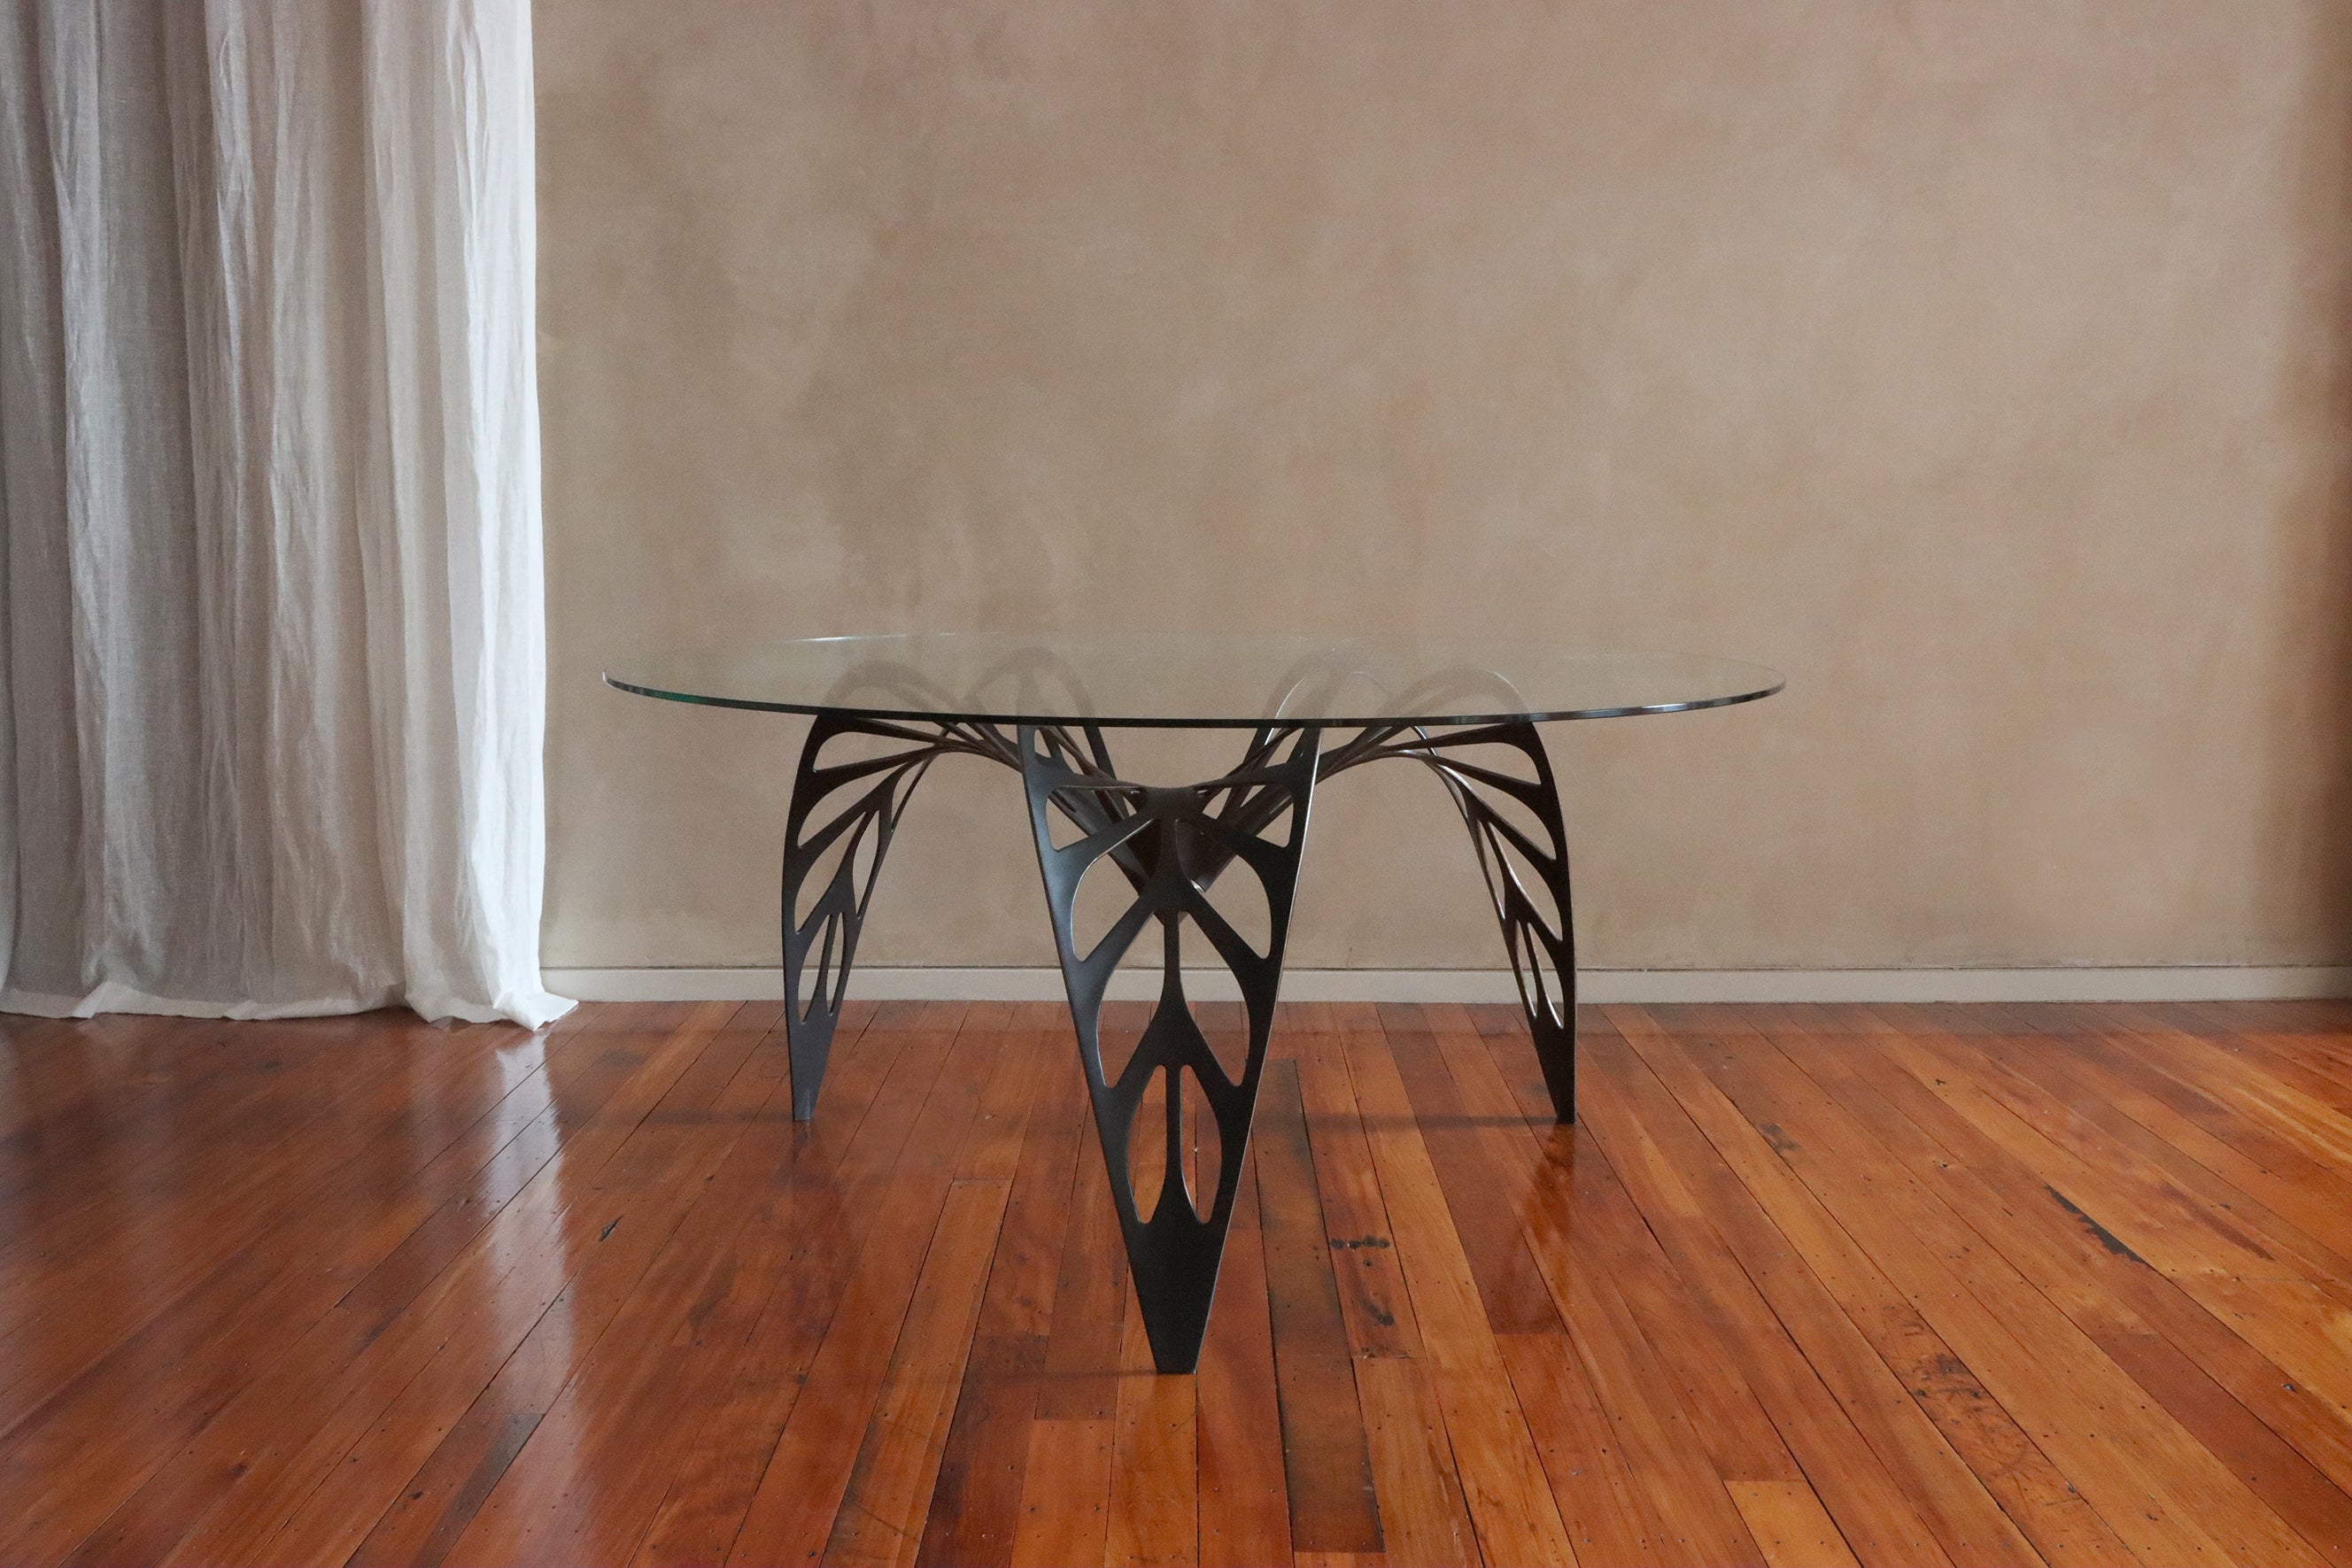 Designed with the intention to bring the outdoors in, the Del Table is reminiscent of our natural surroundings, in this case, abstract versions of leaves of the Monstera Deliciosa.

The Del Table illustrates a creative take on borrowing elements